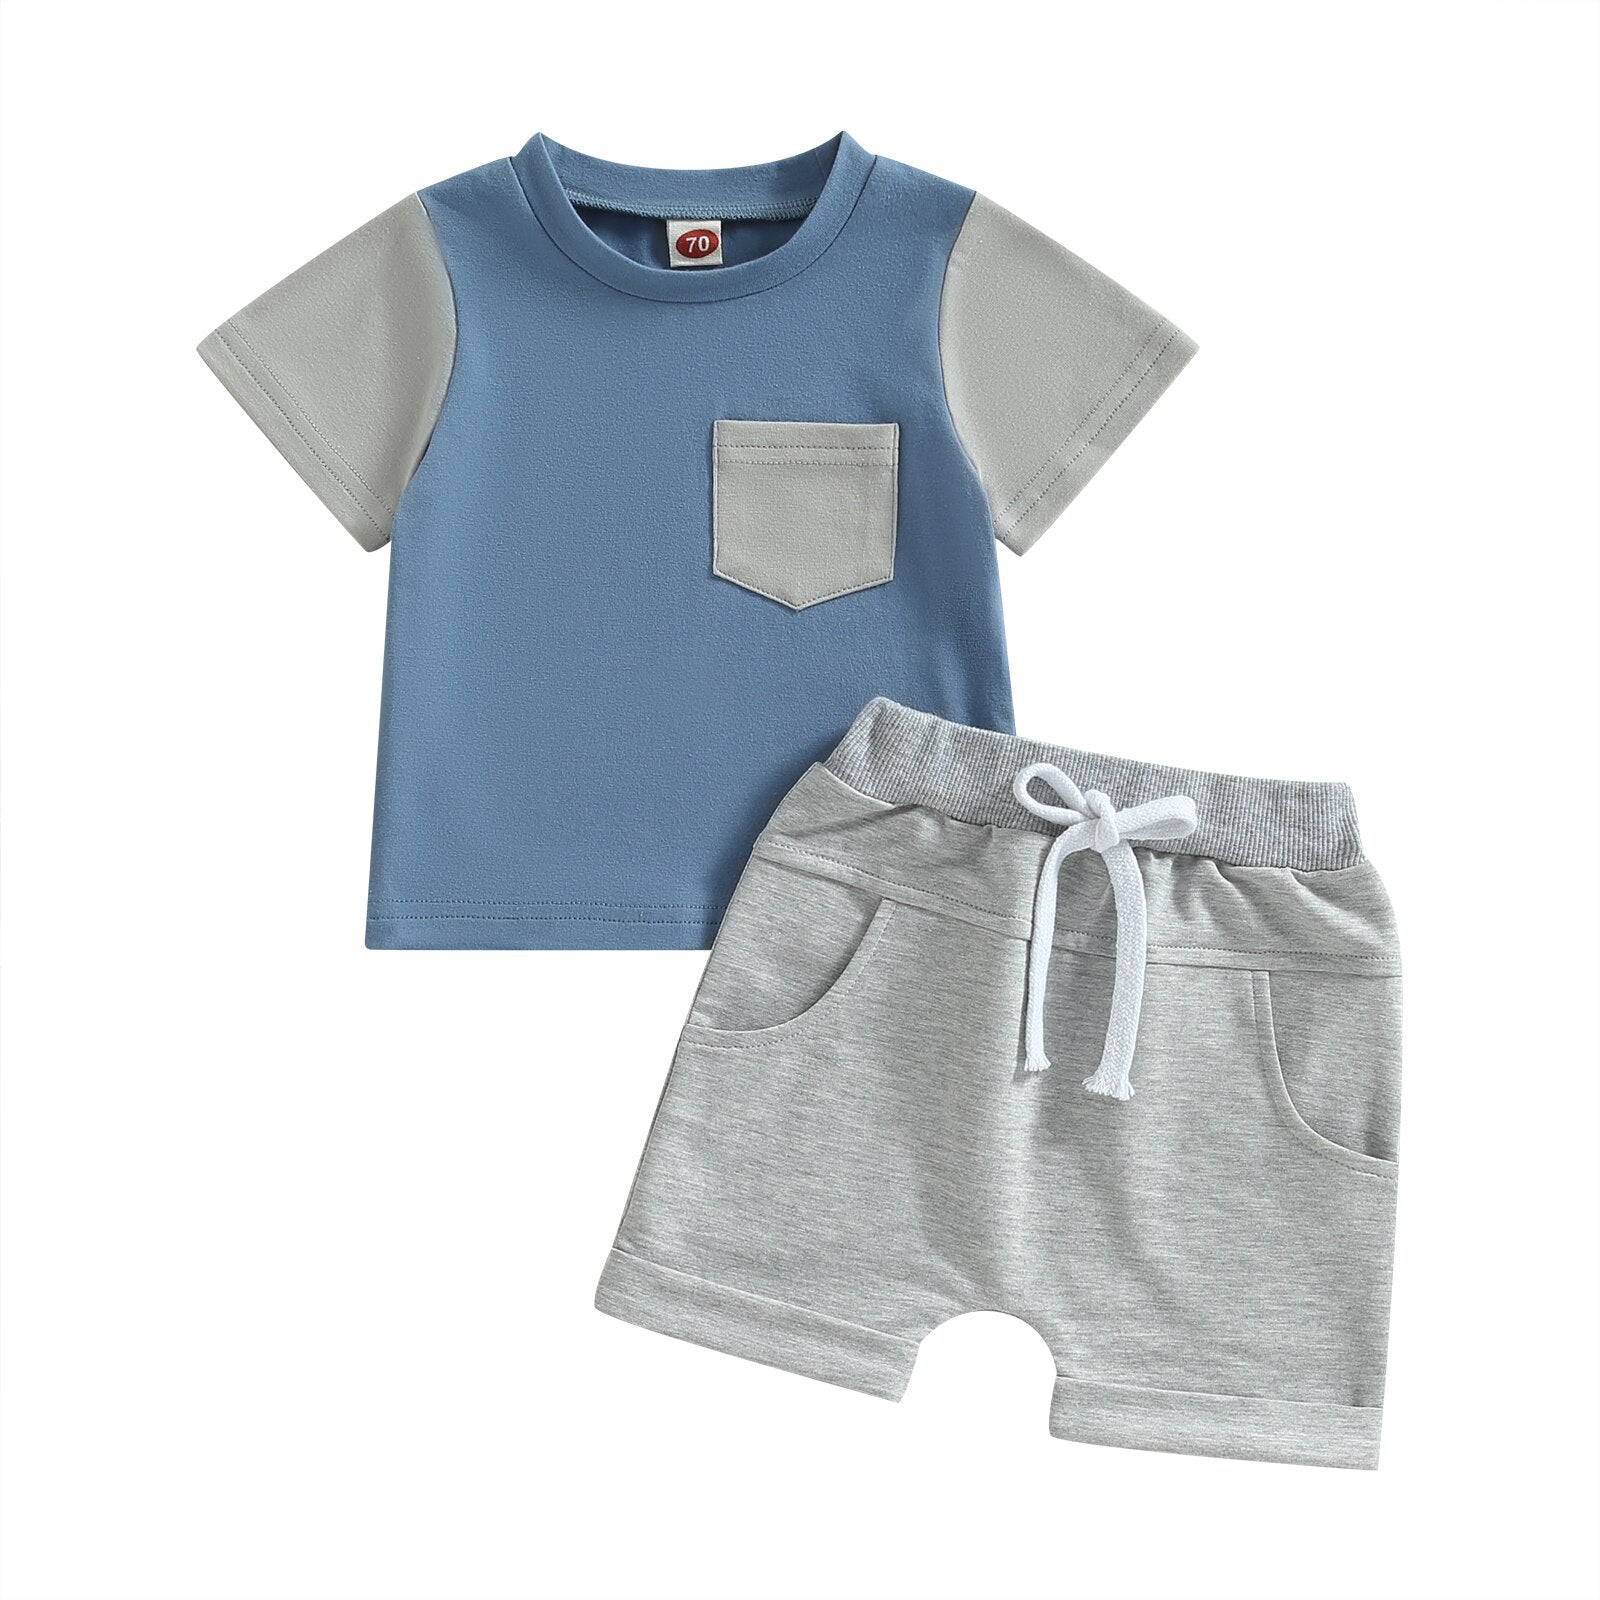 Two-toned T-Shirt with Matching Drawstring Shorts